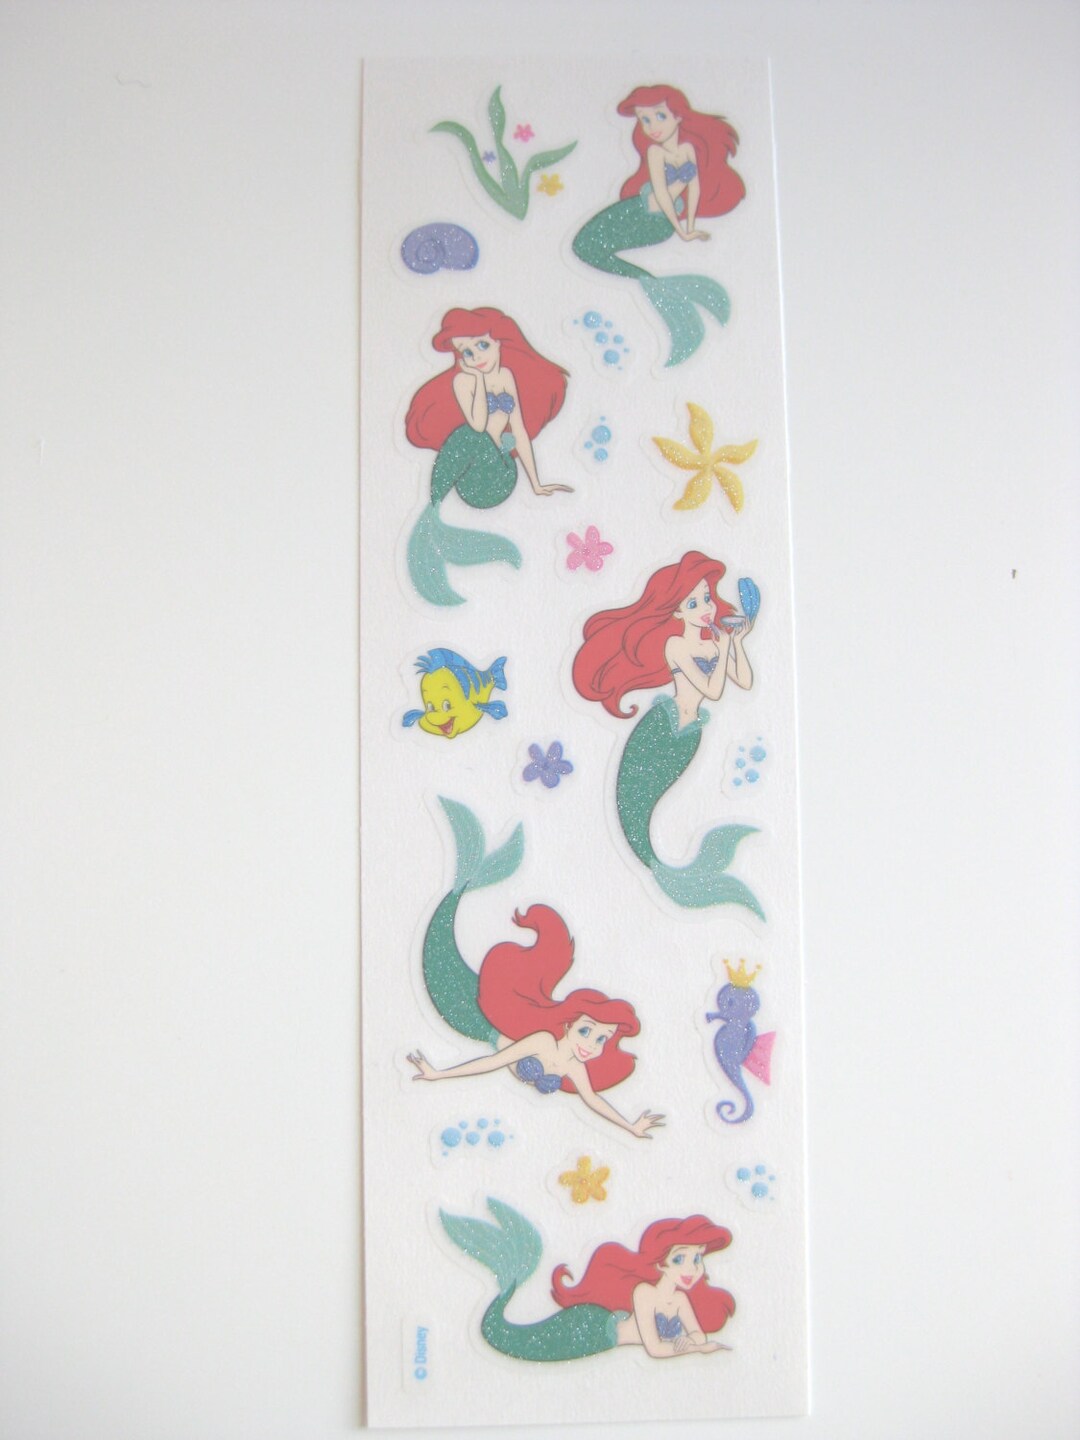 Pirate Sparkly Prismatic Stickers - Packaged